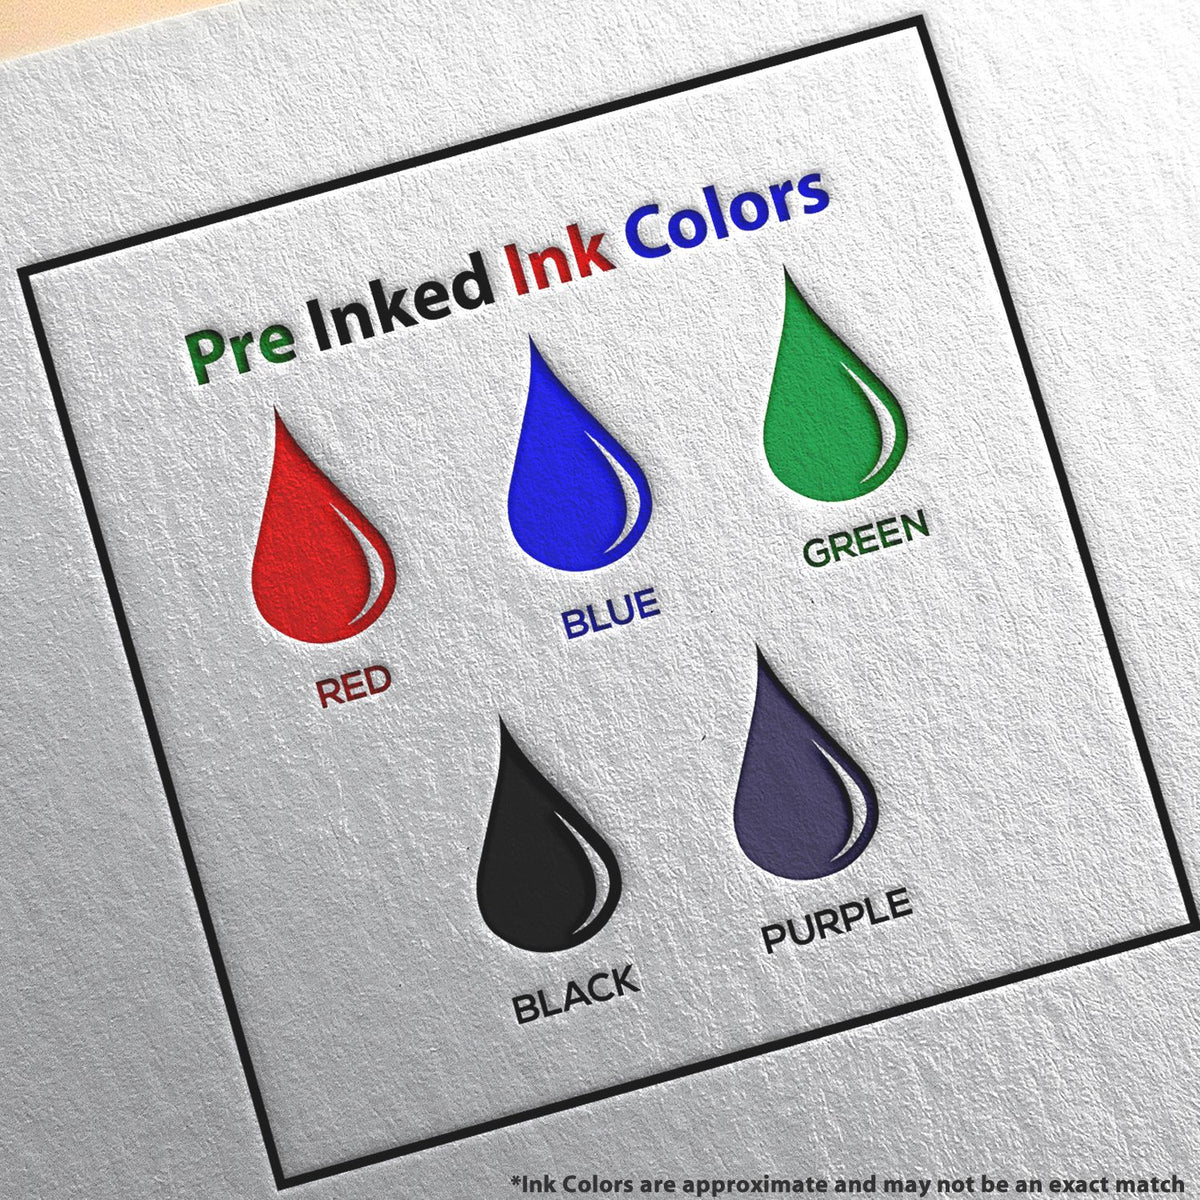 A picture showing the different ink colors or hues available for the MaxLight Premium Pre-Inked Maryland Rectangular Notarial Stamp product.